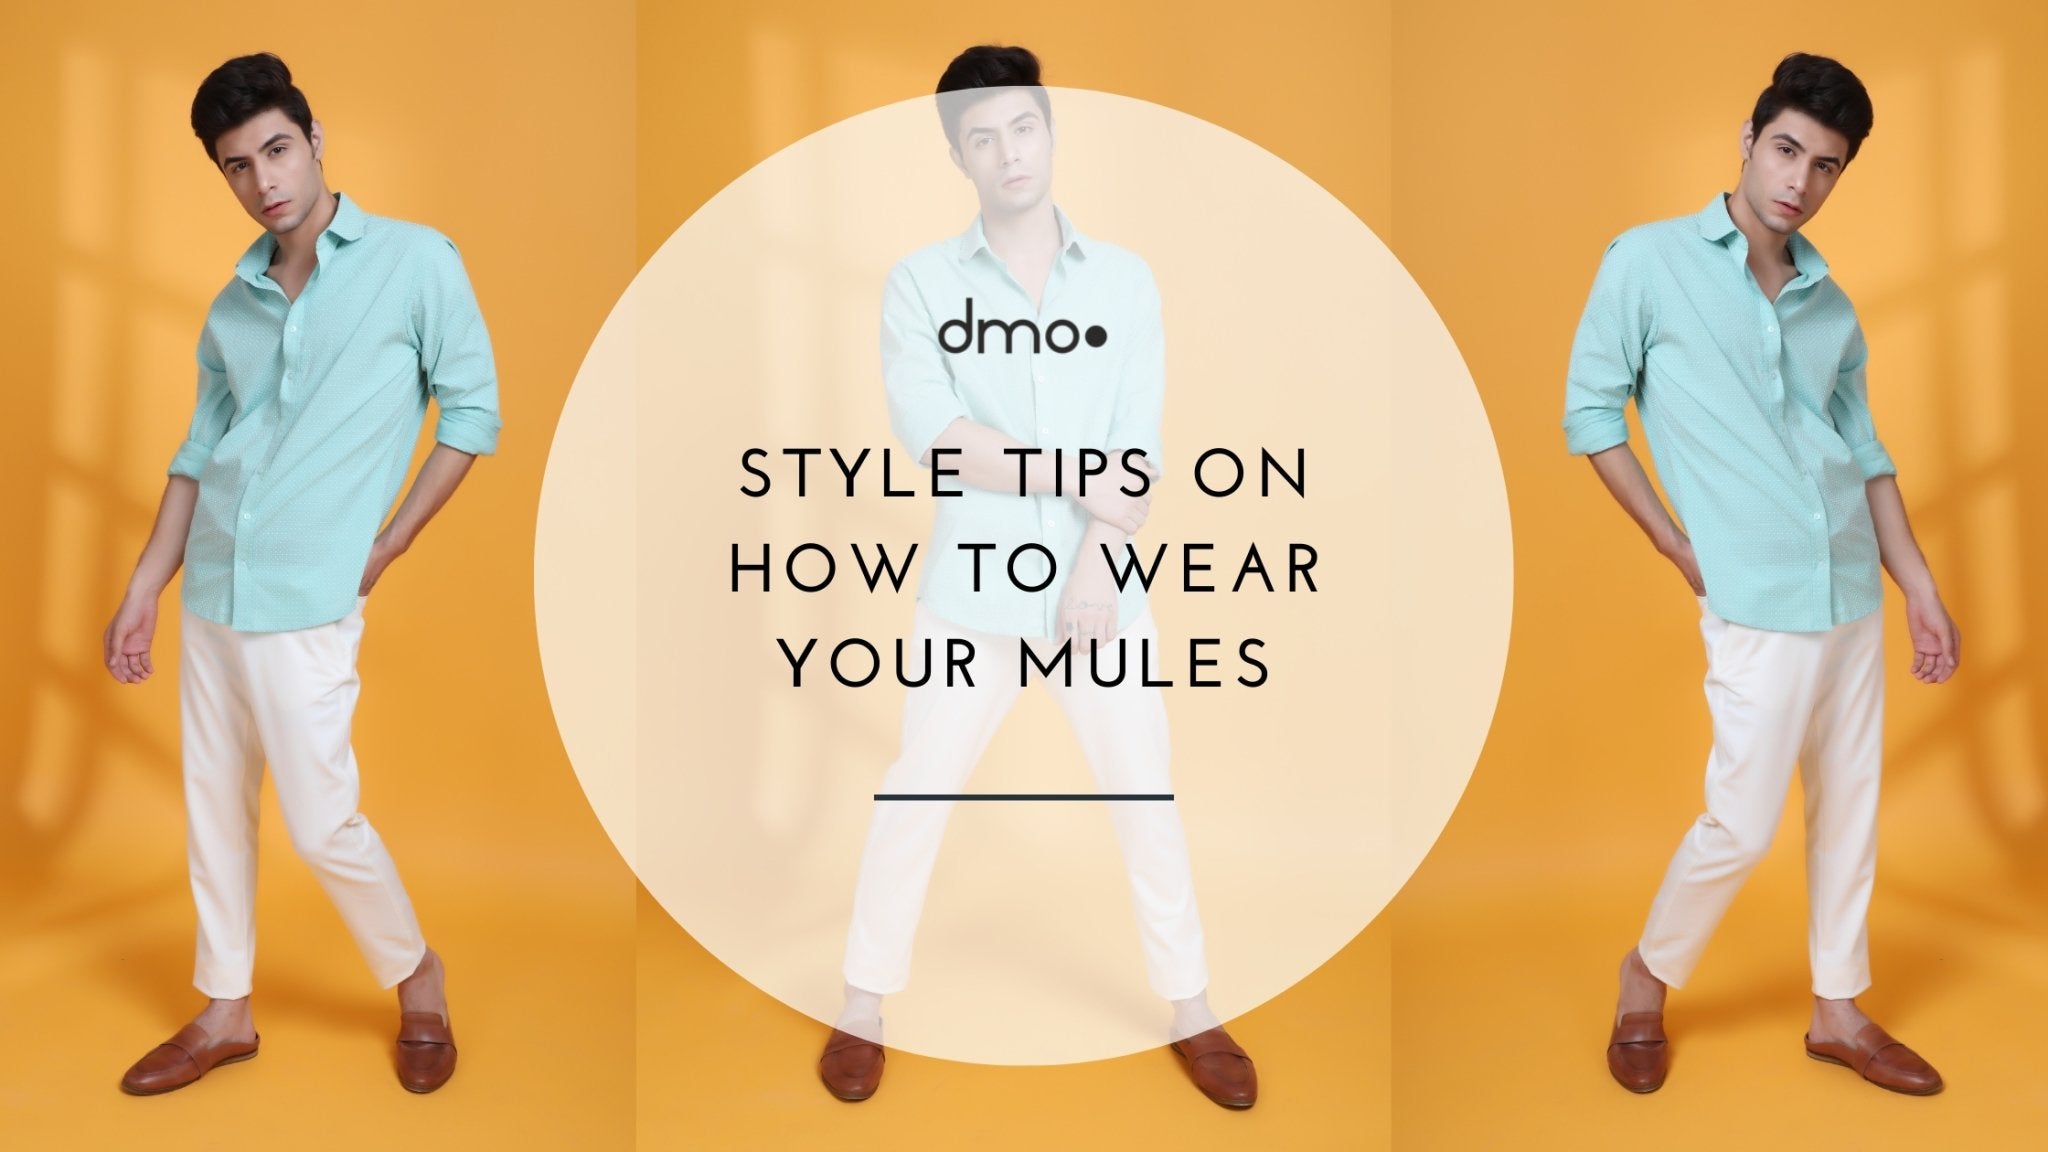 Style Tips on how to wear your mules - dmodot Shoes